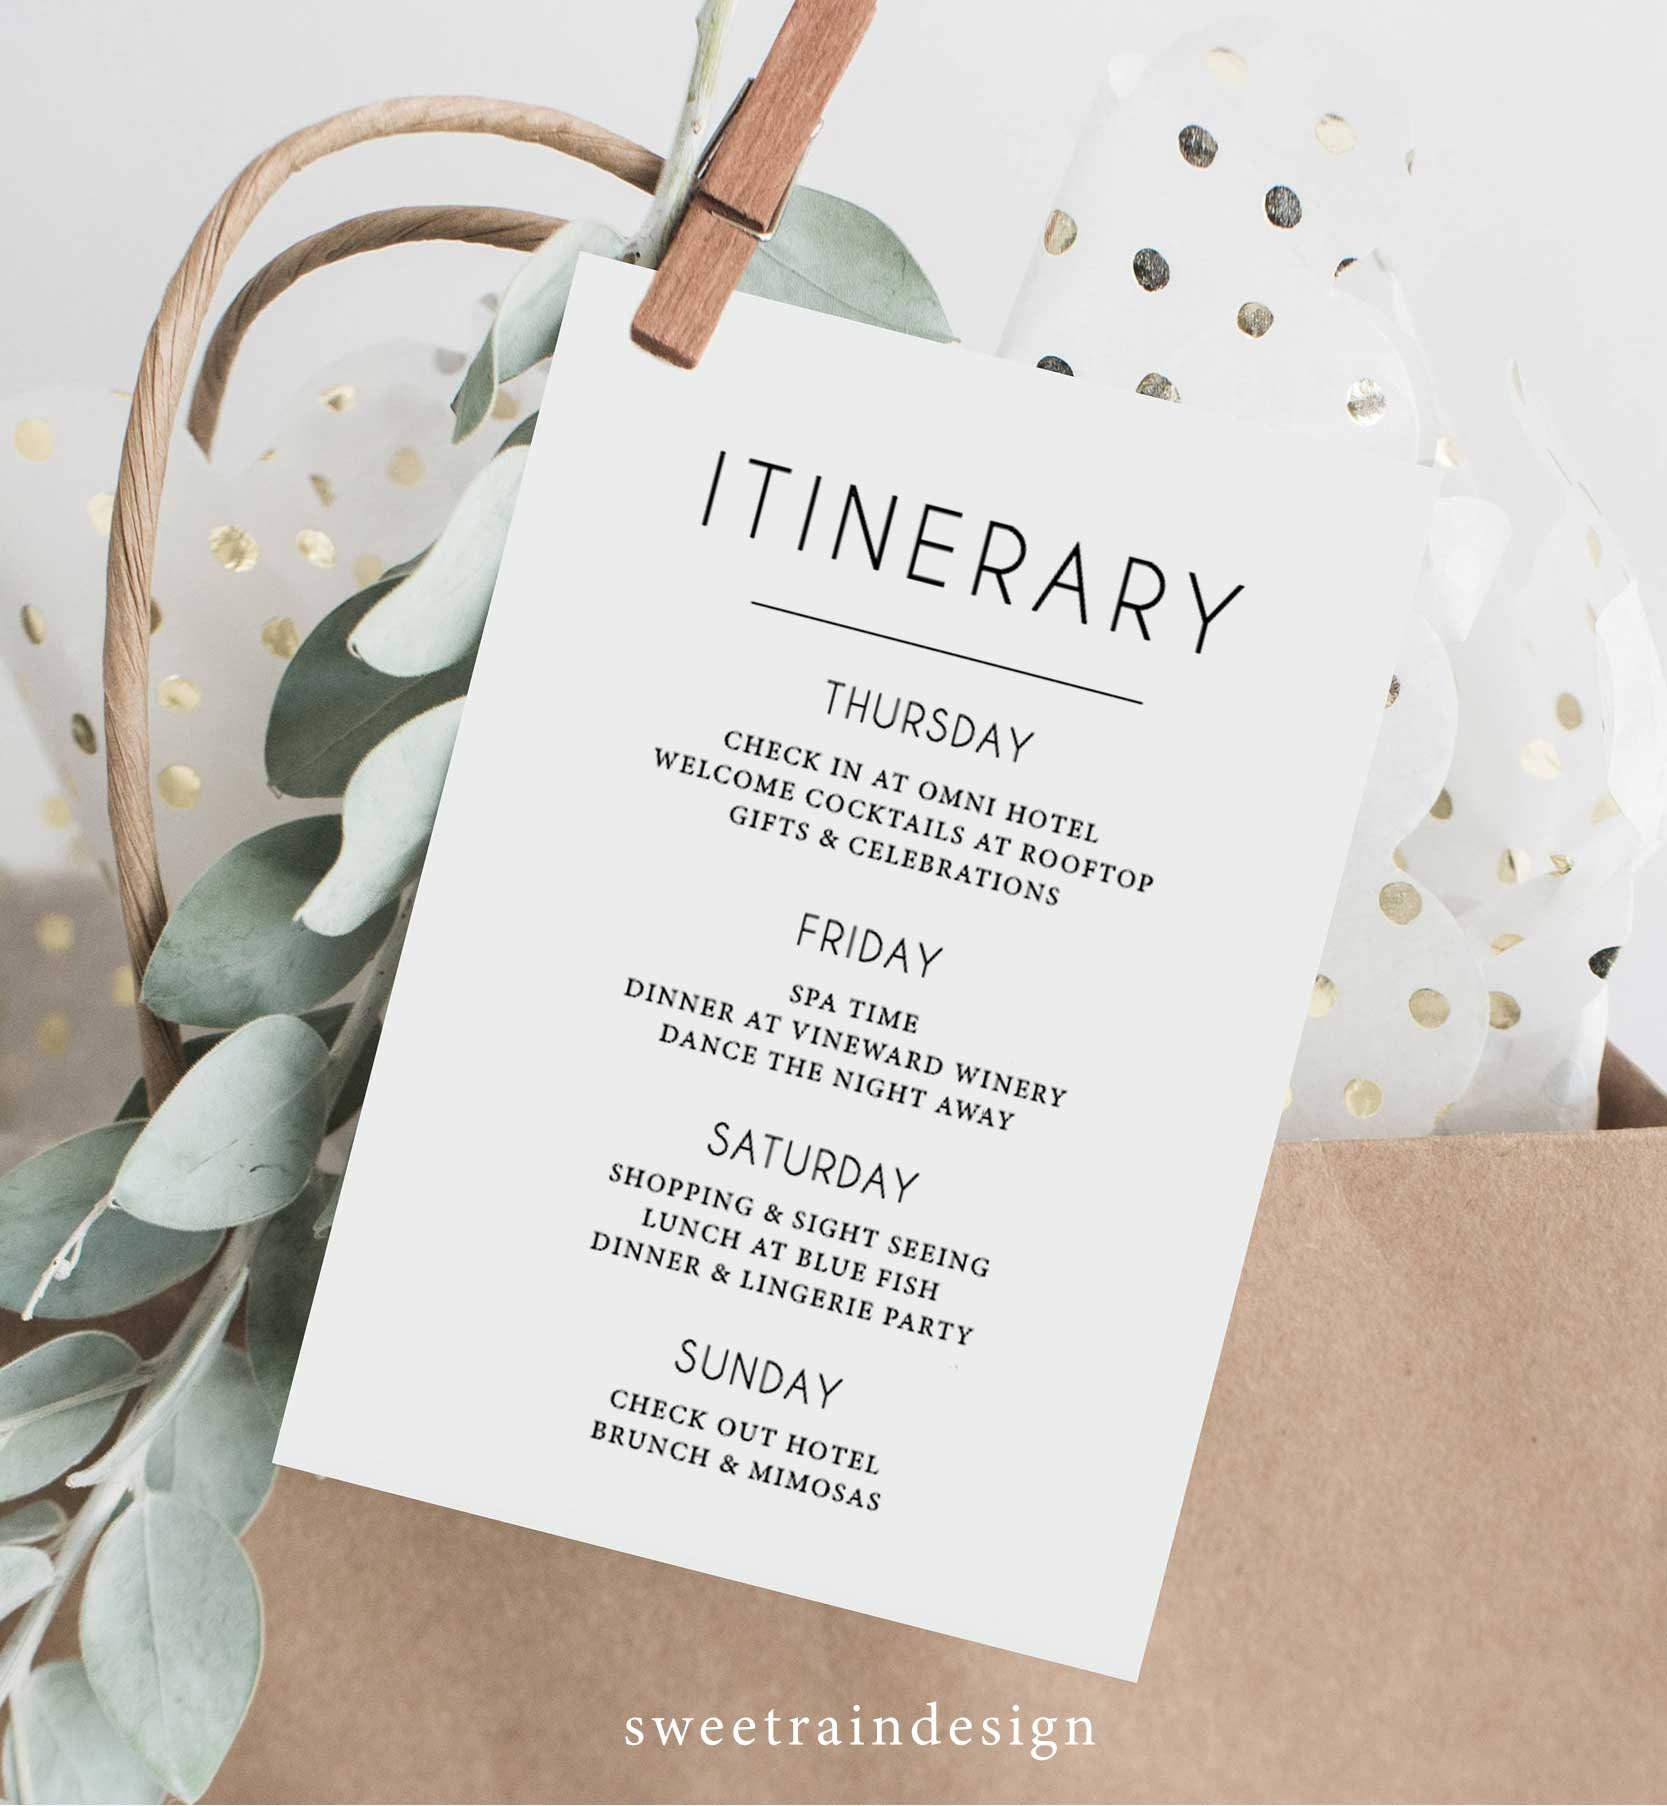 Itinerary for Wedding Simple Itinerary Template Destination image